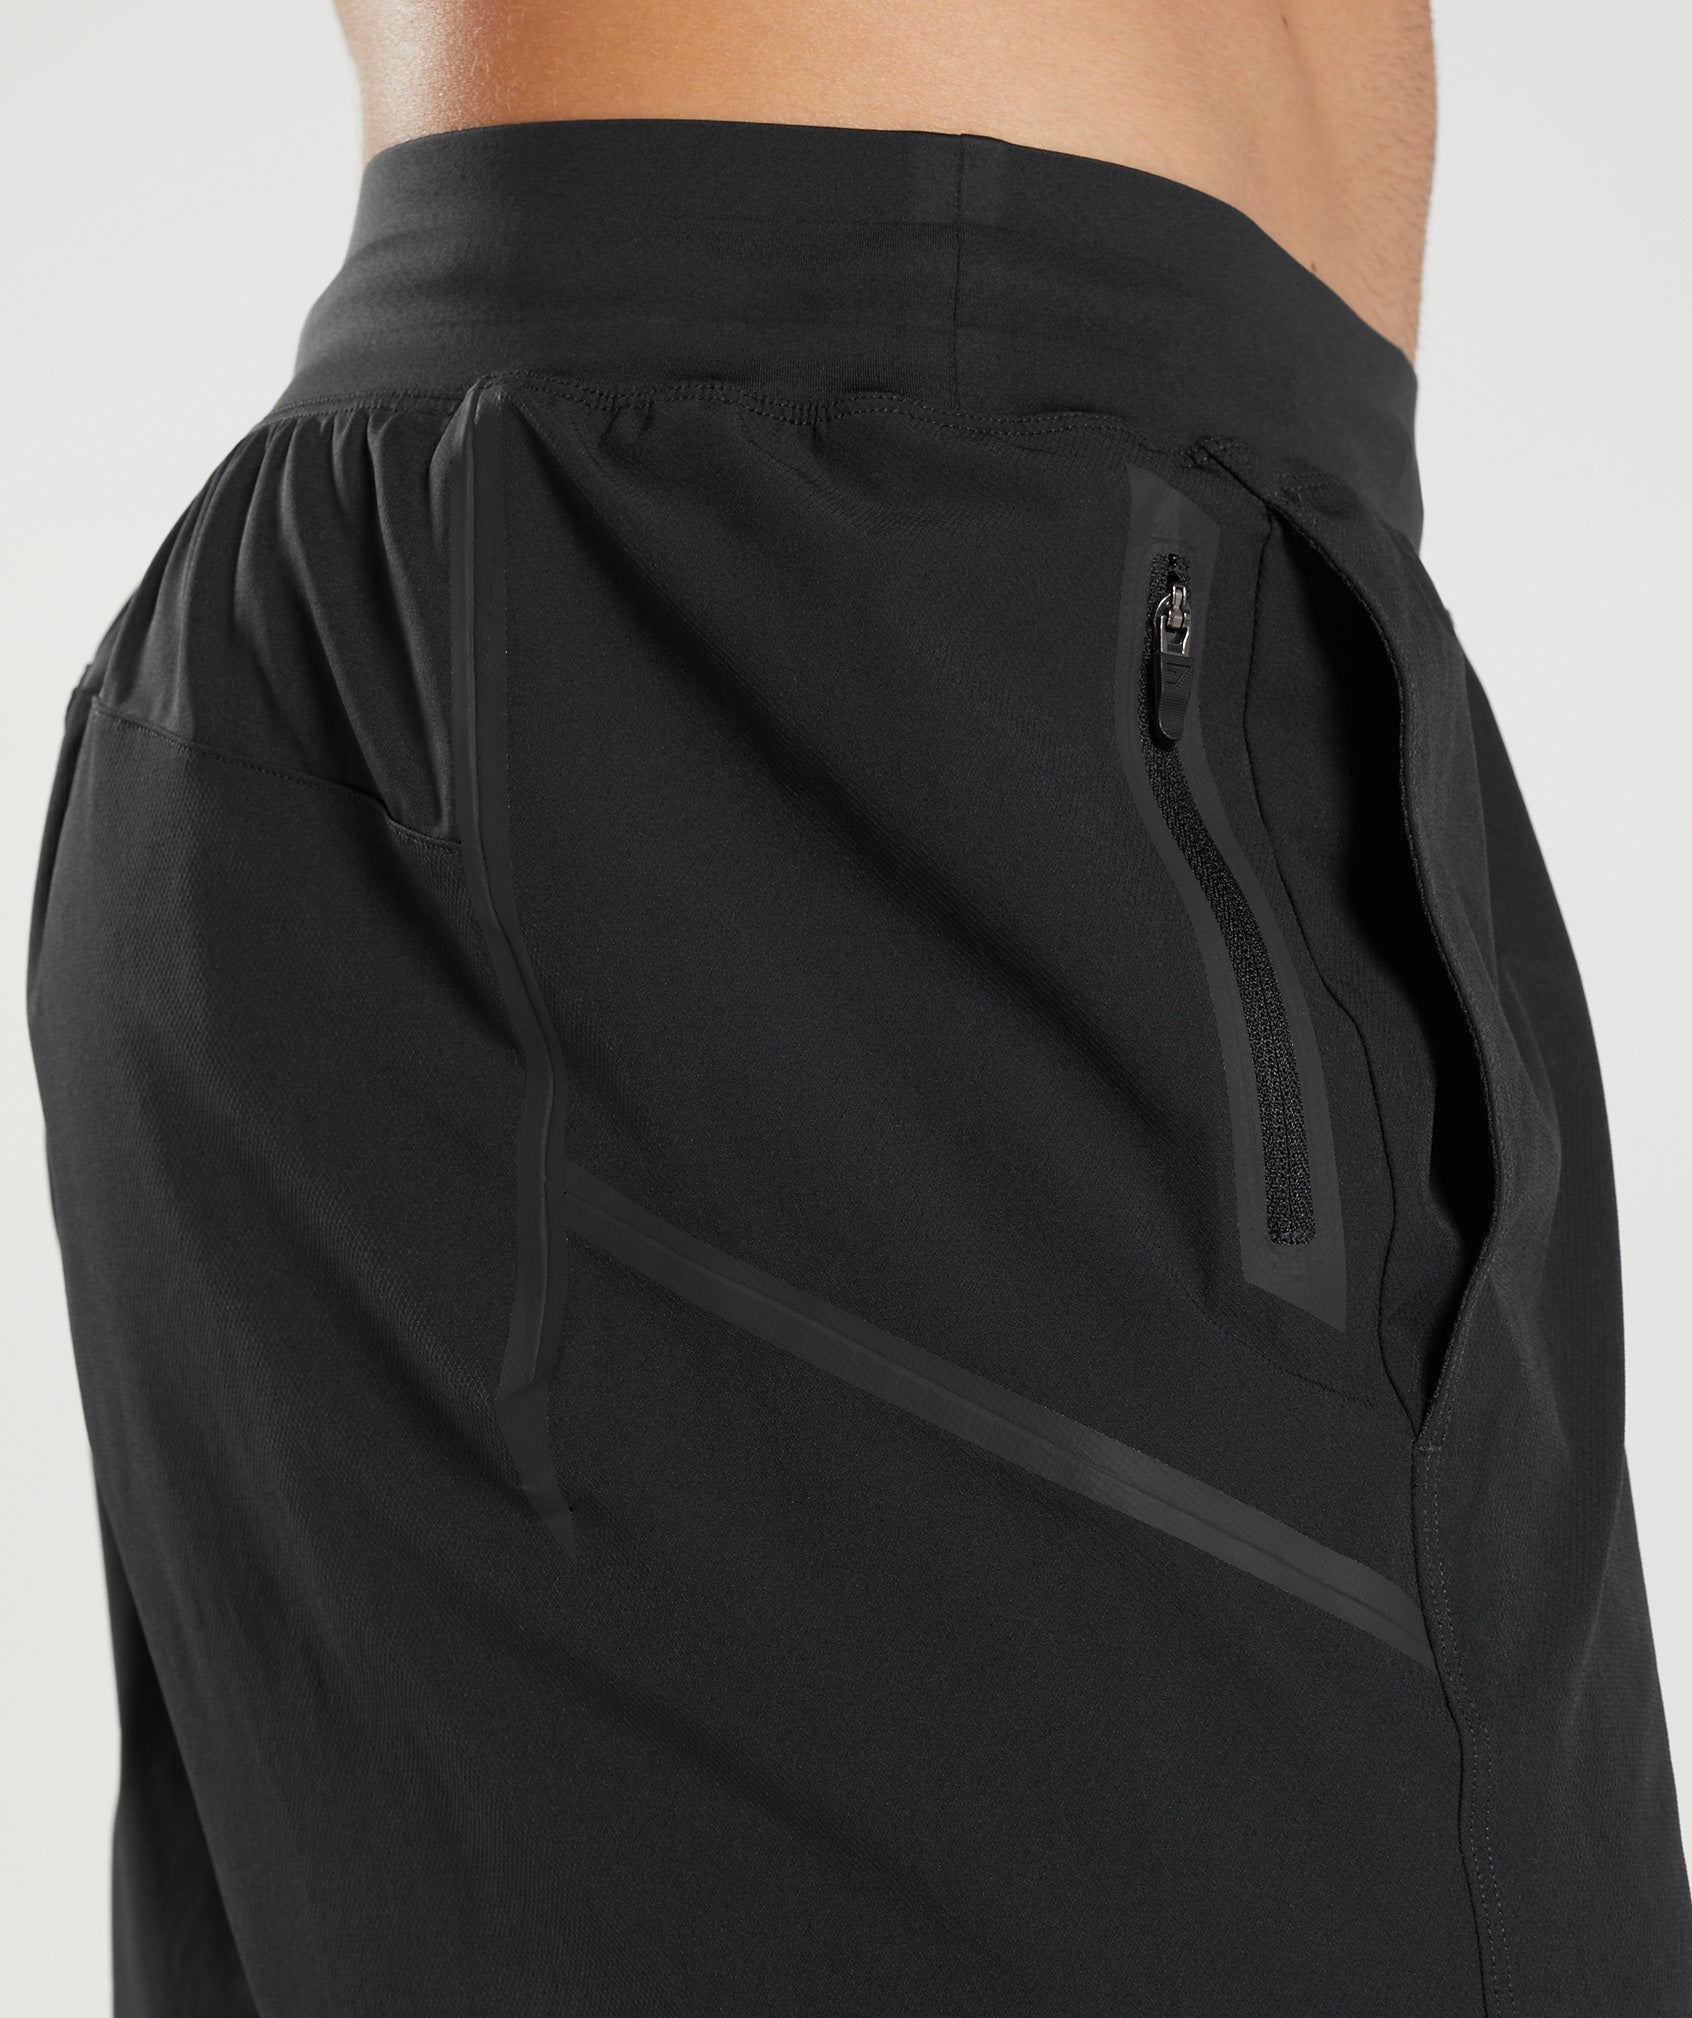 Apex 8" Function Shorts in Black - view 5